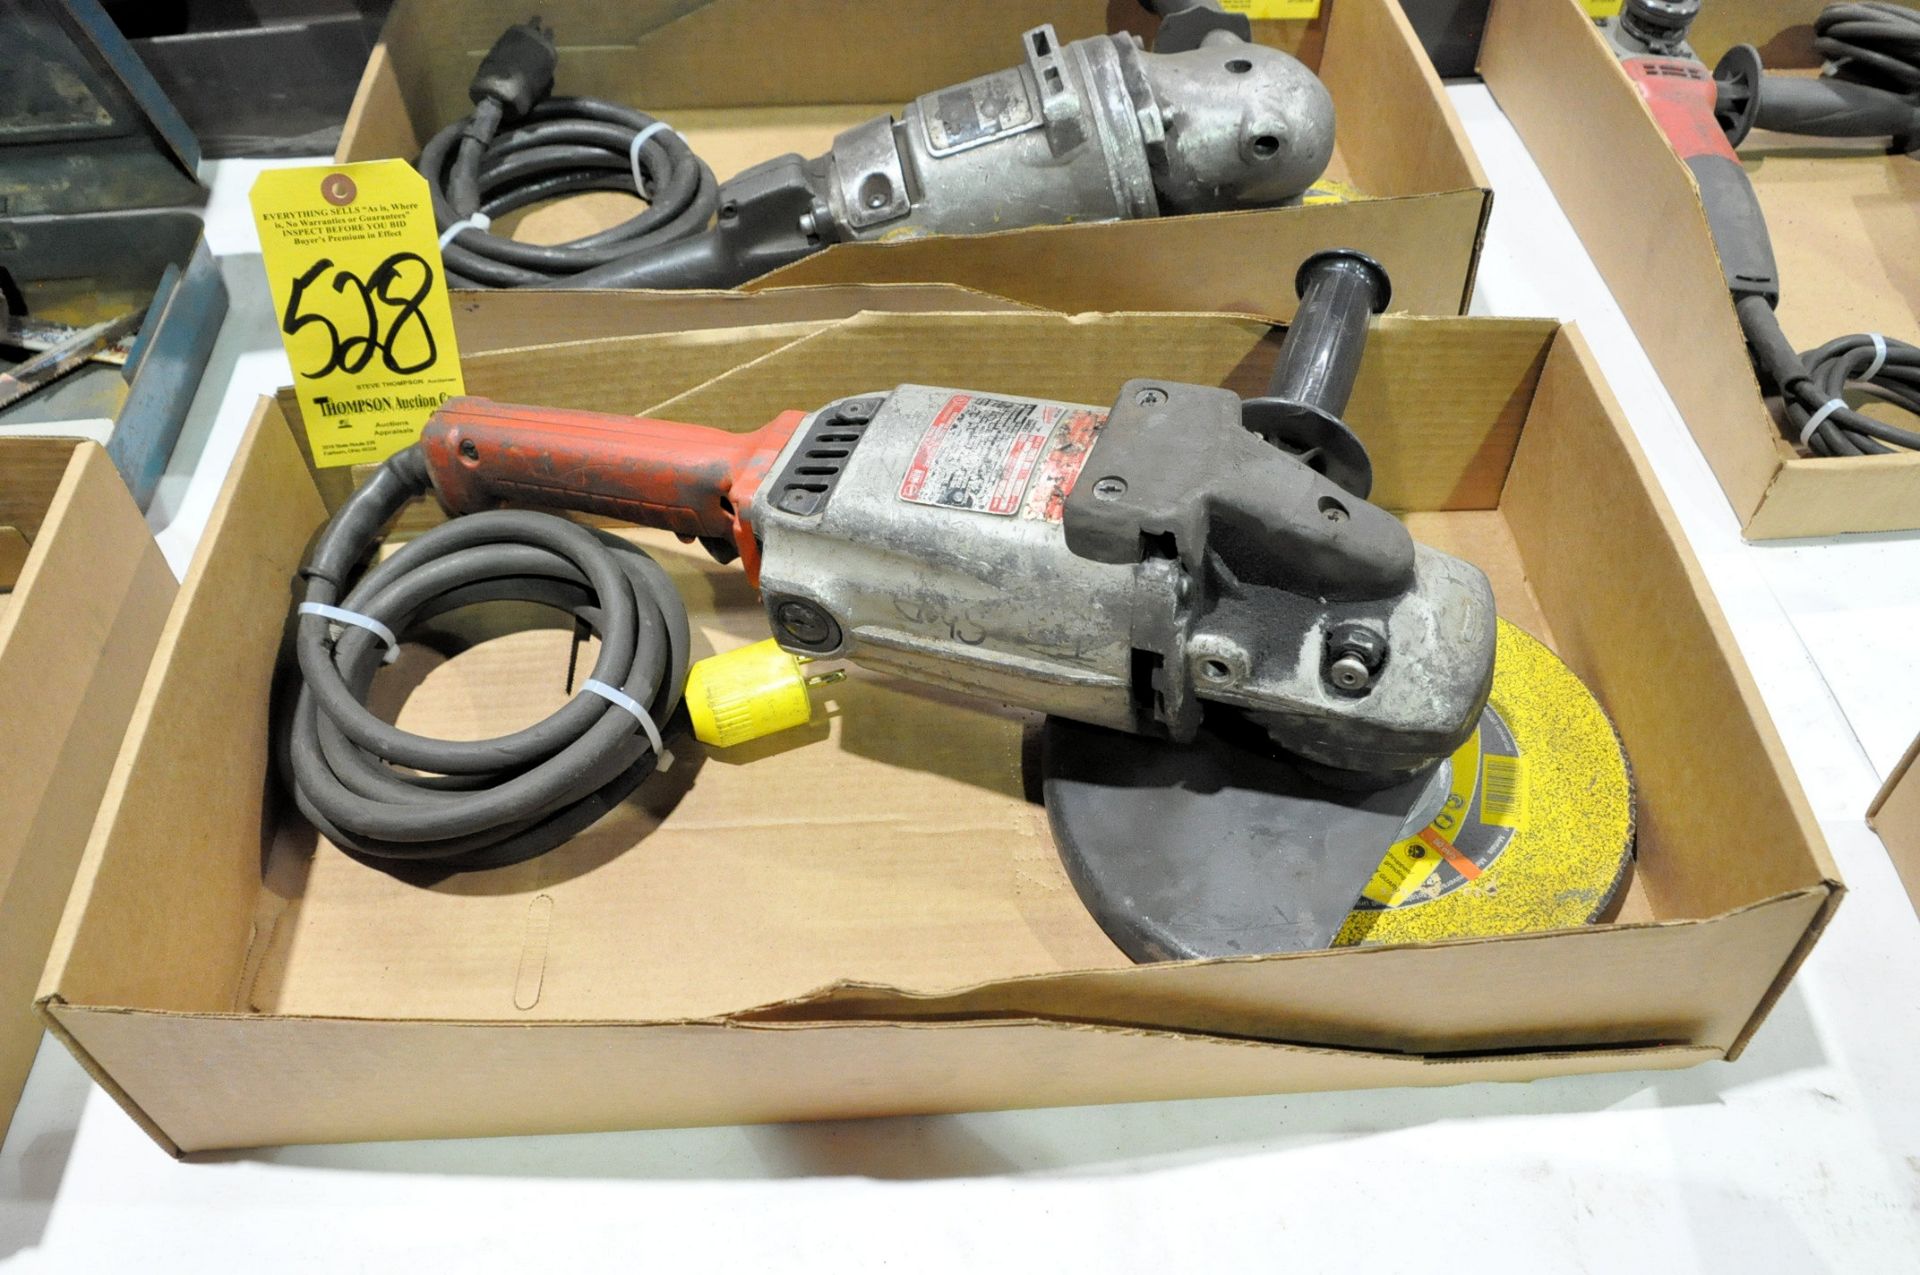 Milwaukee No. 6065, 7-9" Electric Angle Grinder in (1) Box